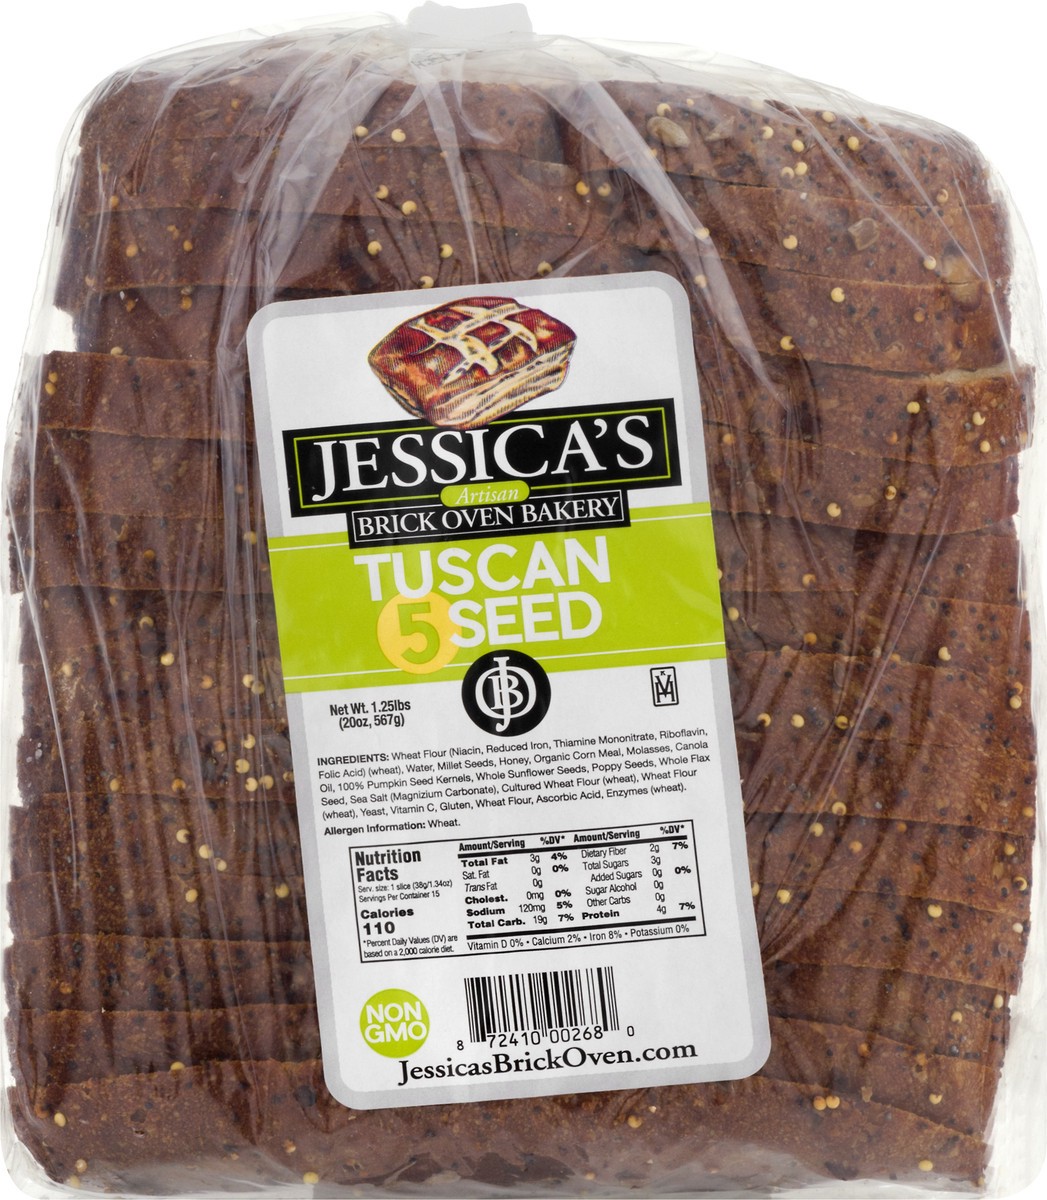 slide 2 of 13, Jessicas Artisan Brick Oven Bakery Tuscan 5 Seed Bread 1.25 lb, 1.25 lb